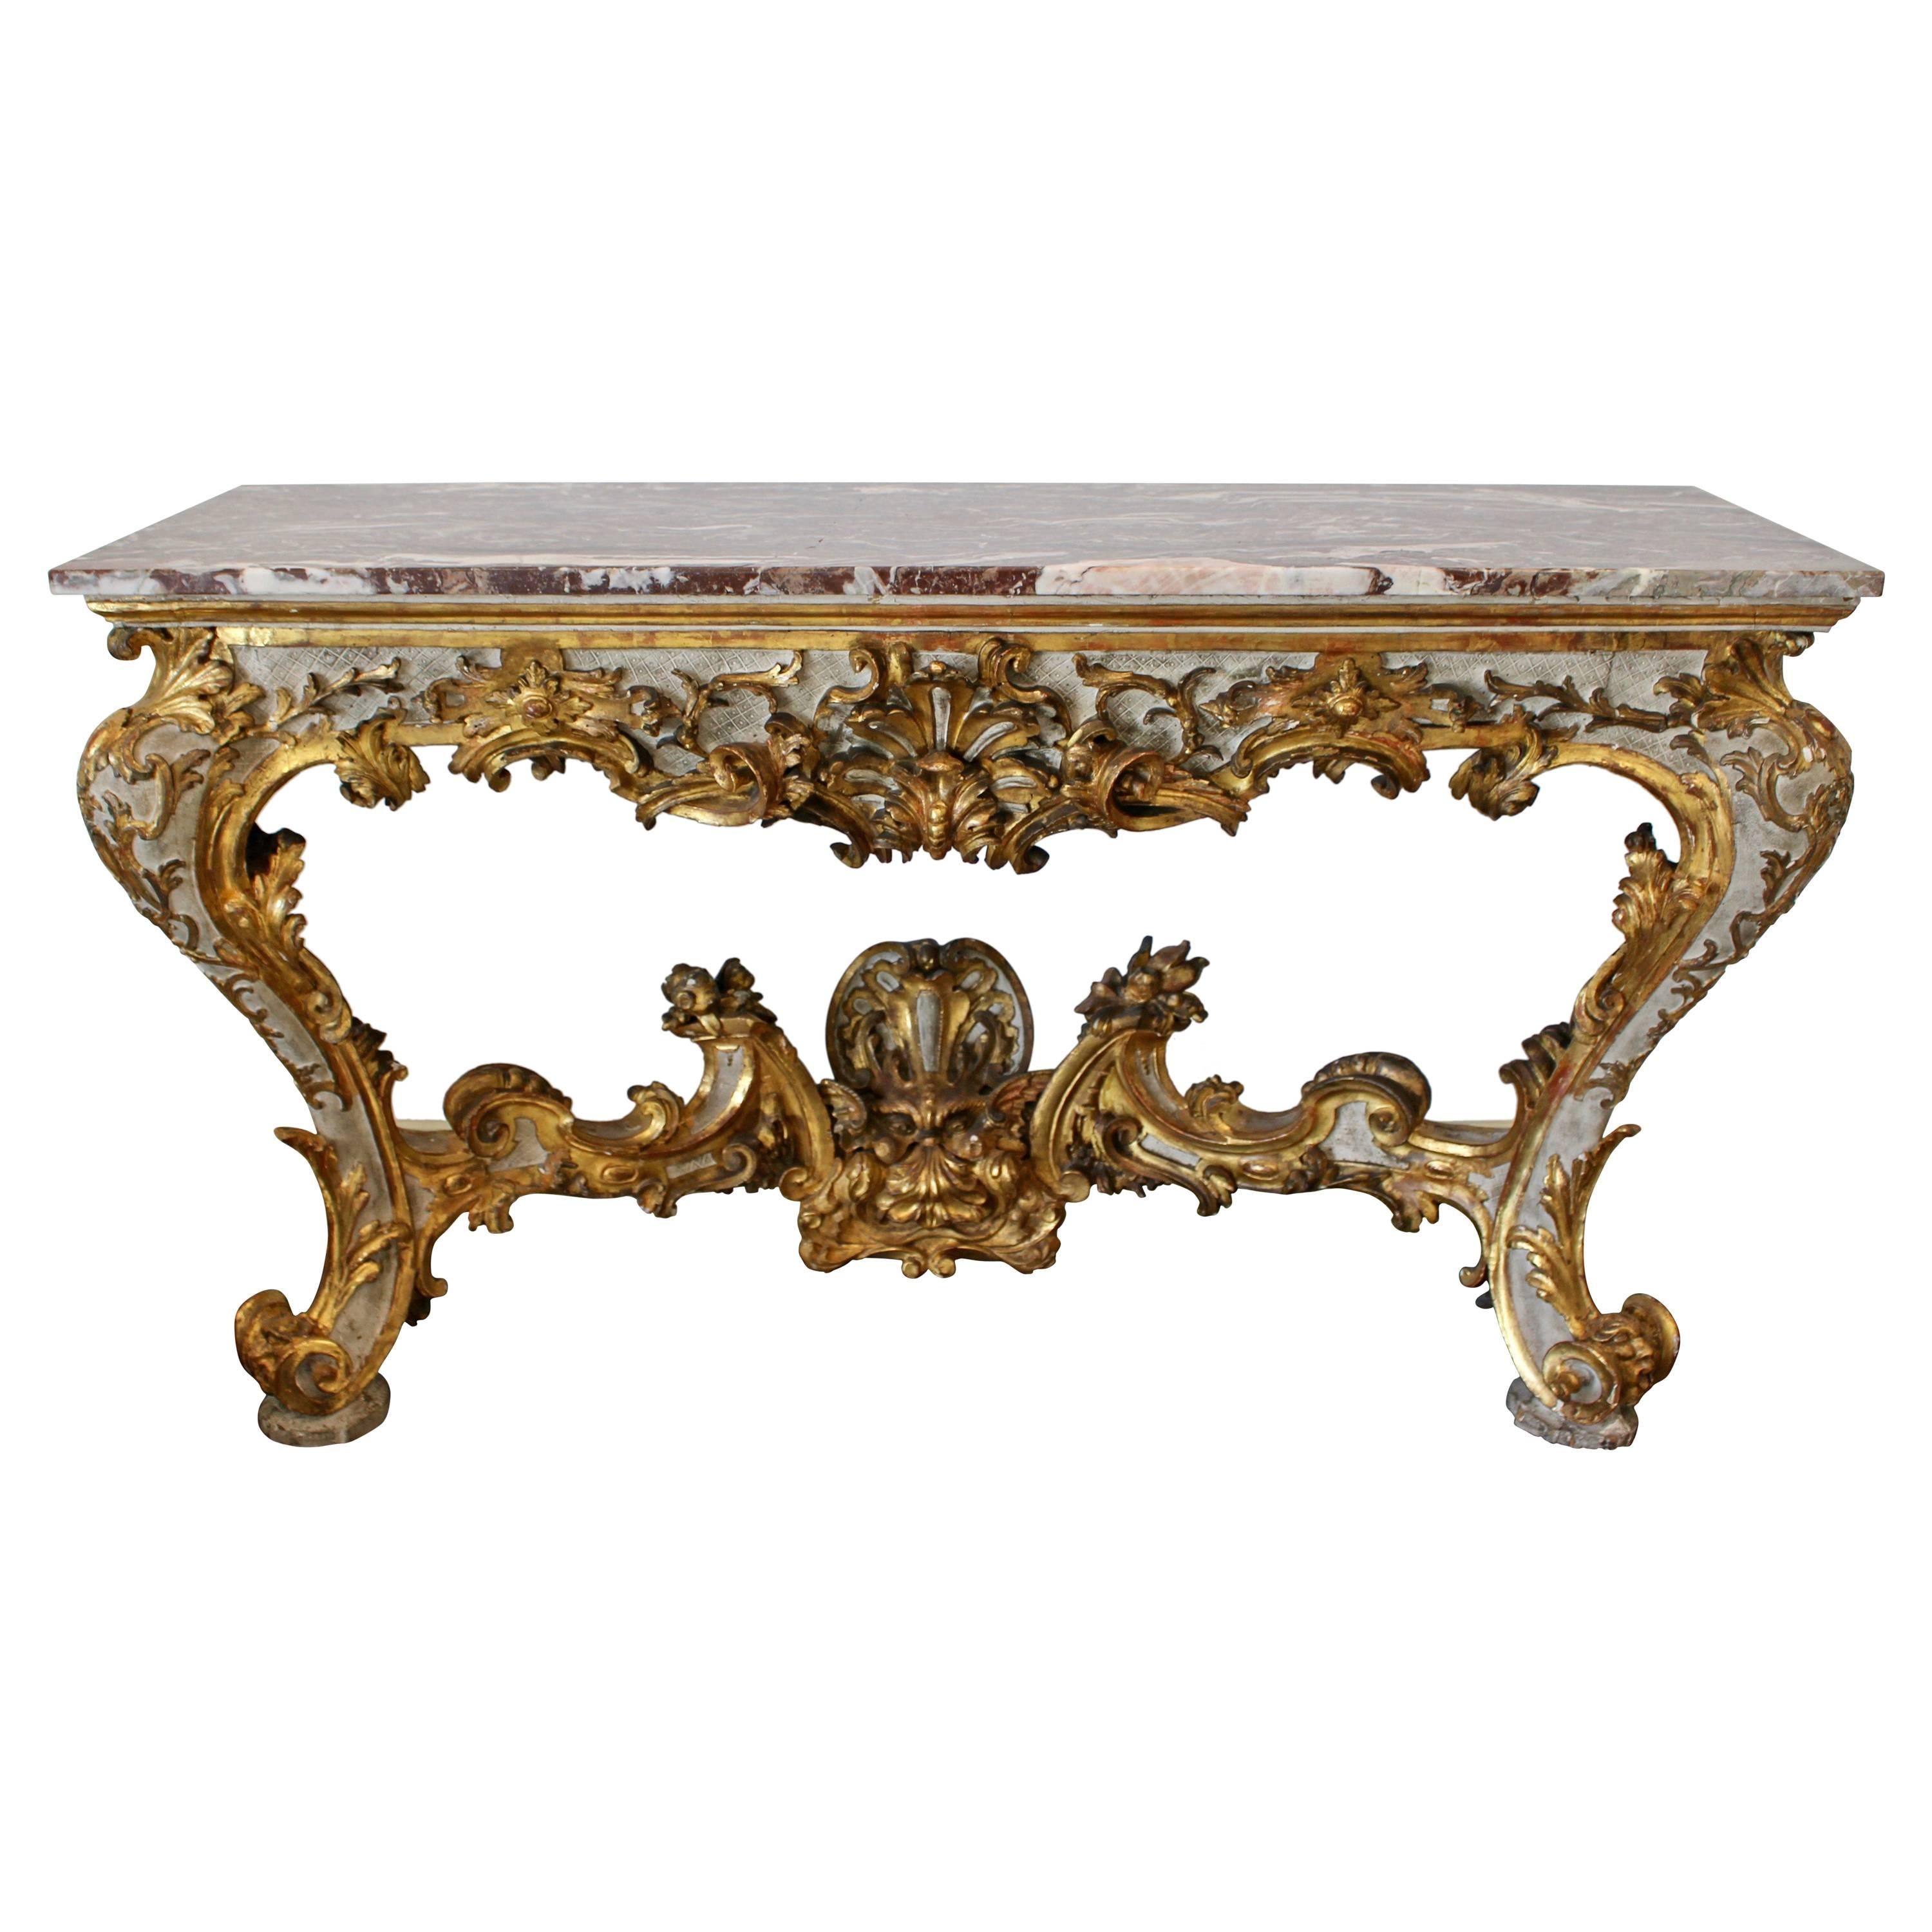 1720s Venetian Early Rococo Period Giltwood Console Table with Red Marble Top For Sale